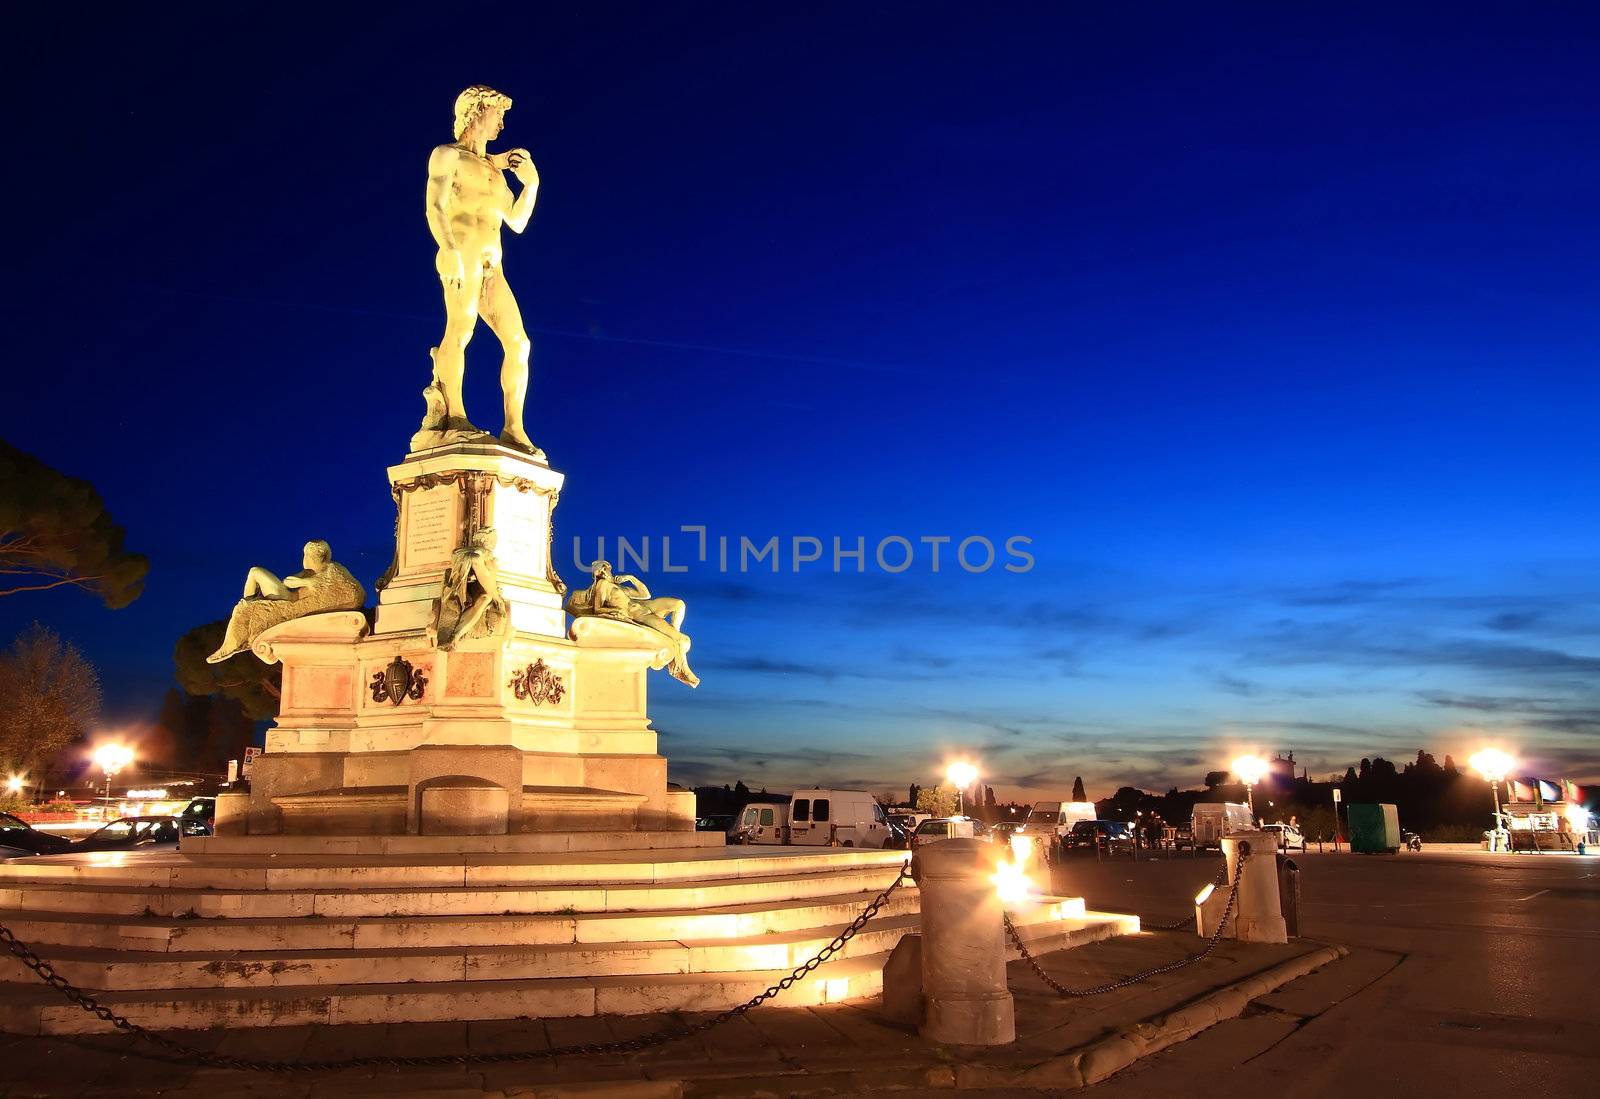 Statue of David, located in Micheal Angelo Park Florence, Italy